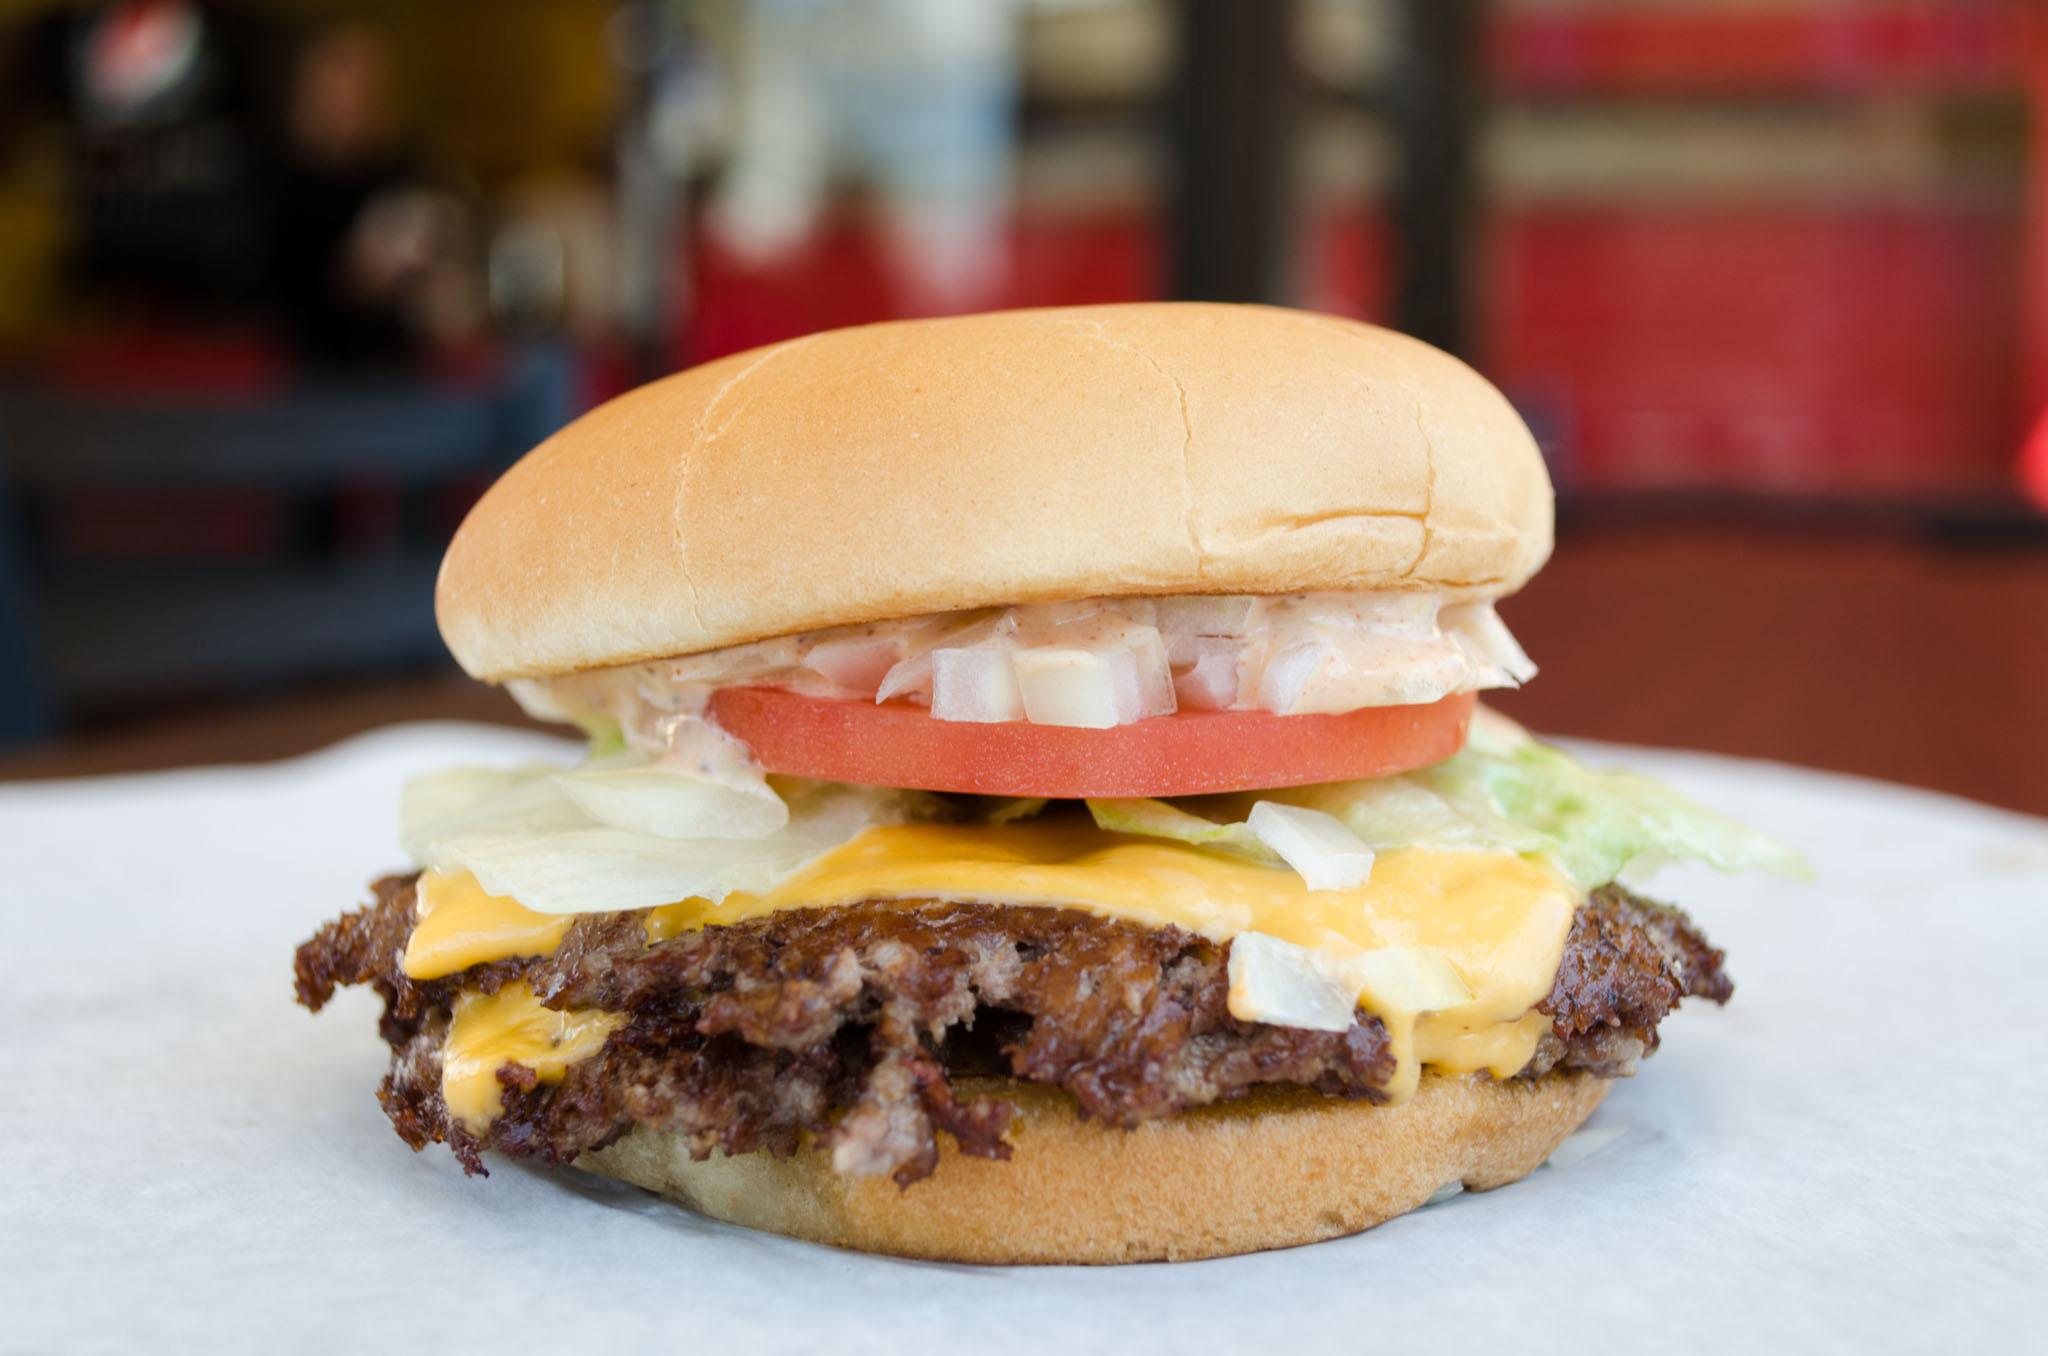 Best Chicago burger restaurants for cheeseburgers and fries